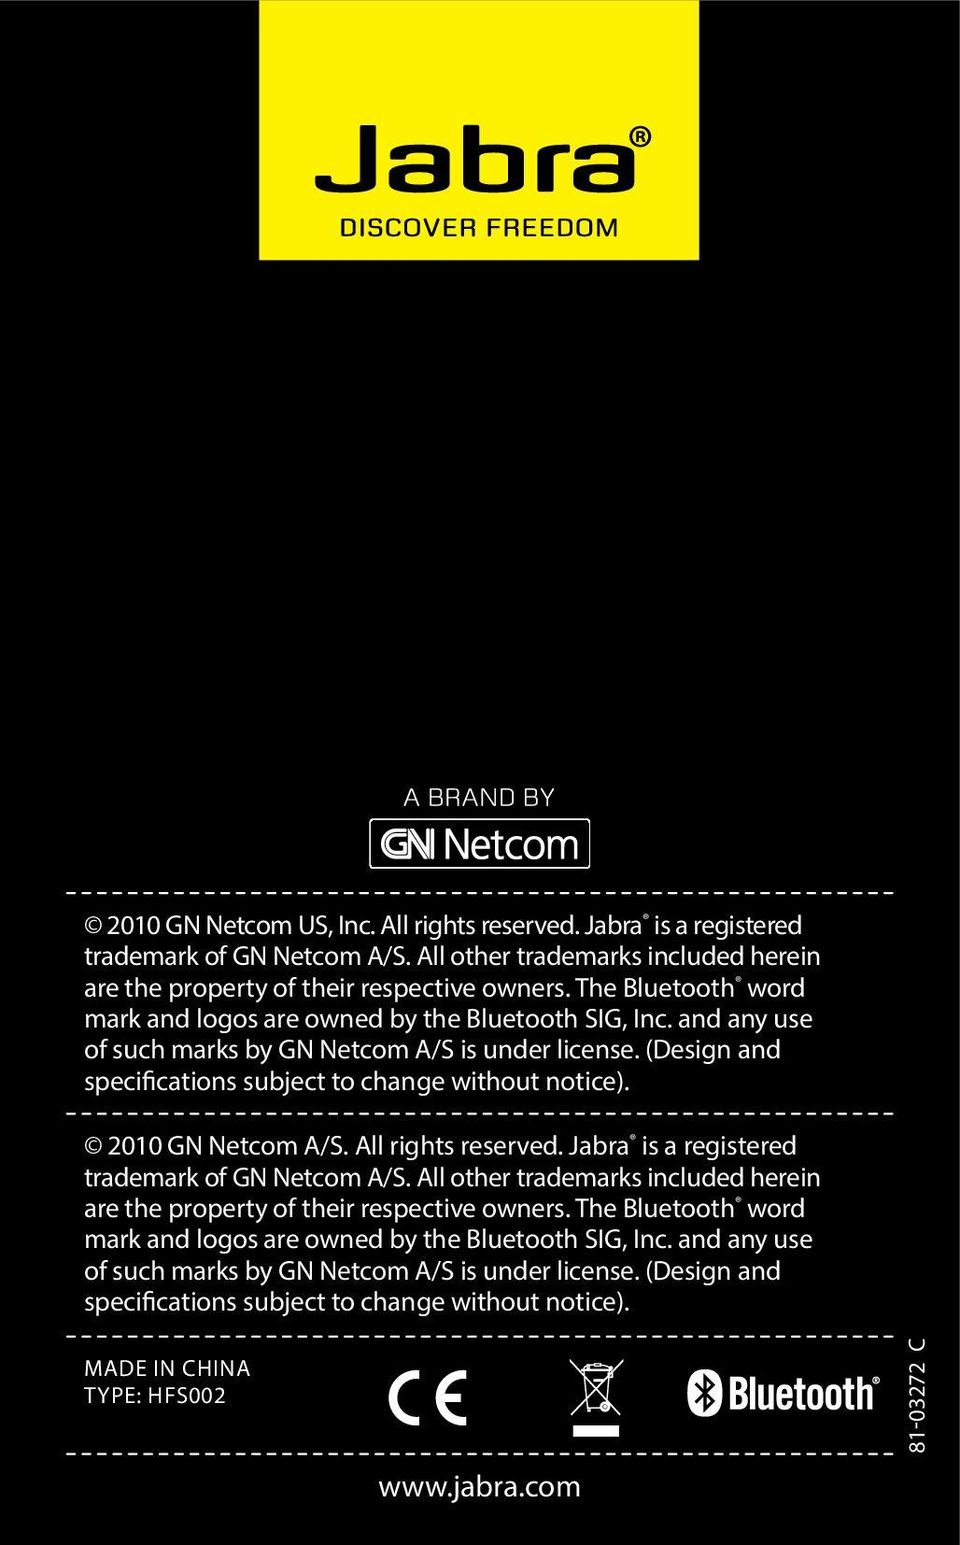 2010 GN Netcom A/S. All rights reserved. Jabra is a registered trademark of GN Netcom A/S. All other trademarks included herein are the property of their respective owners.